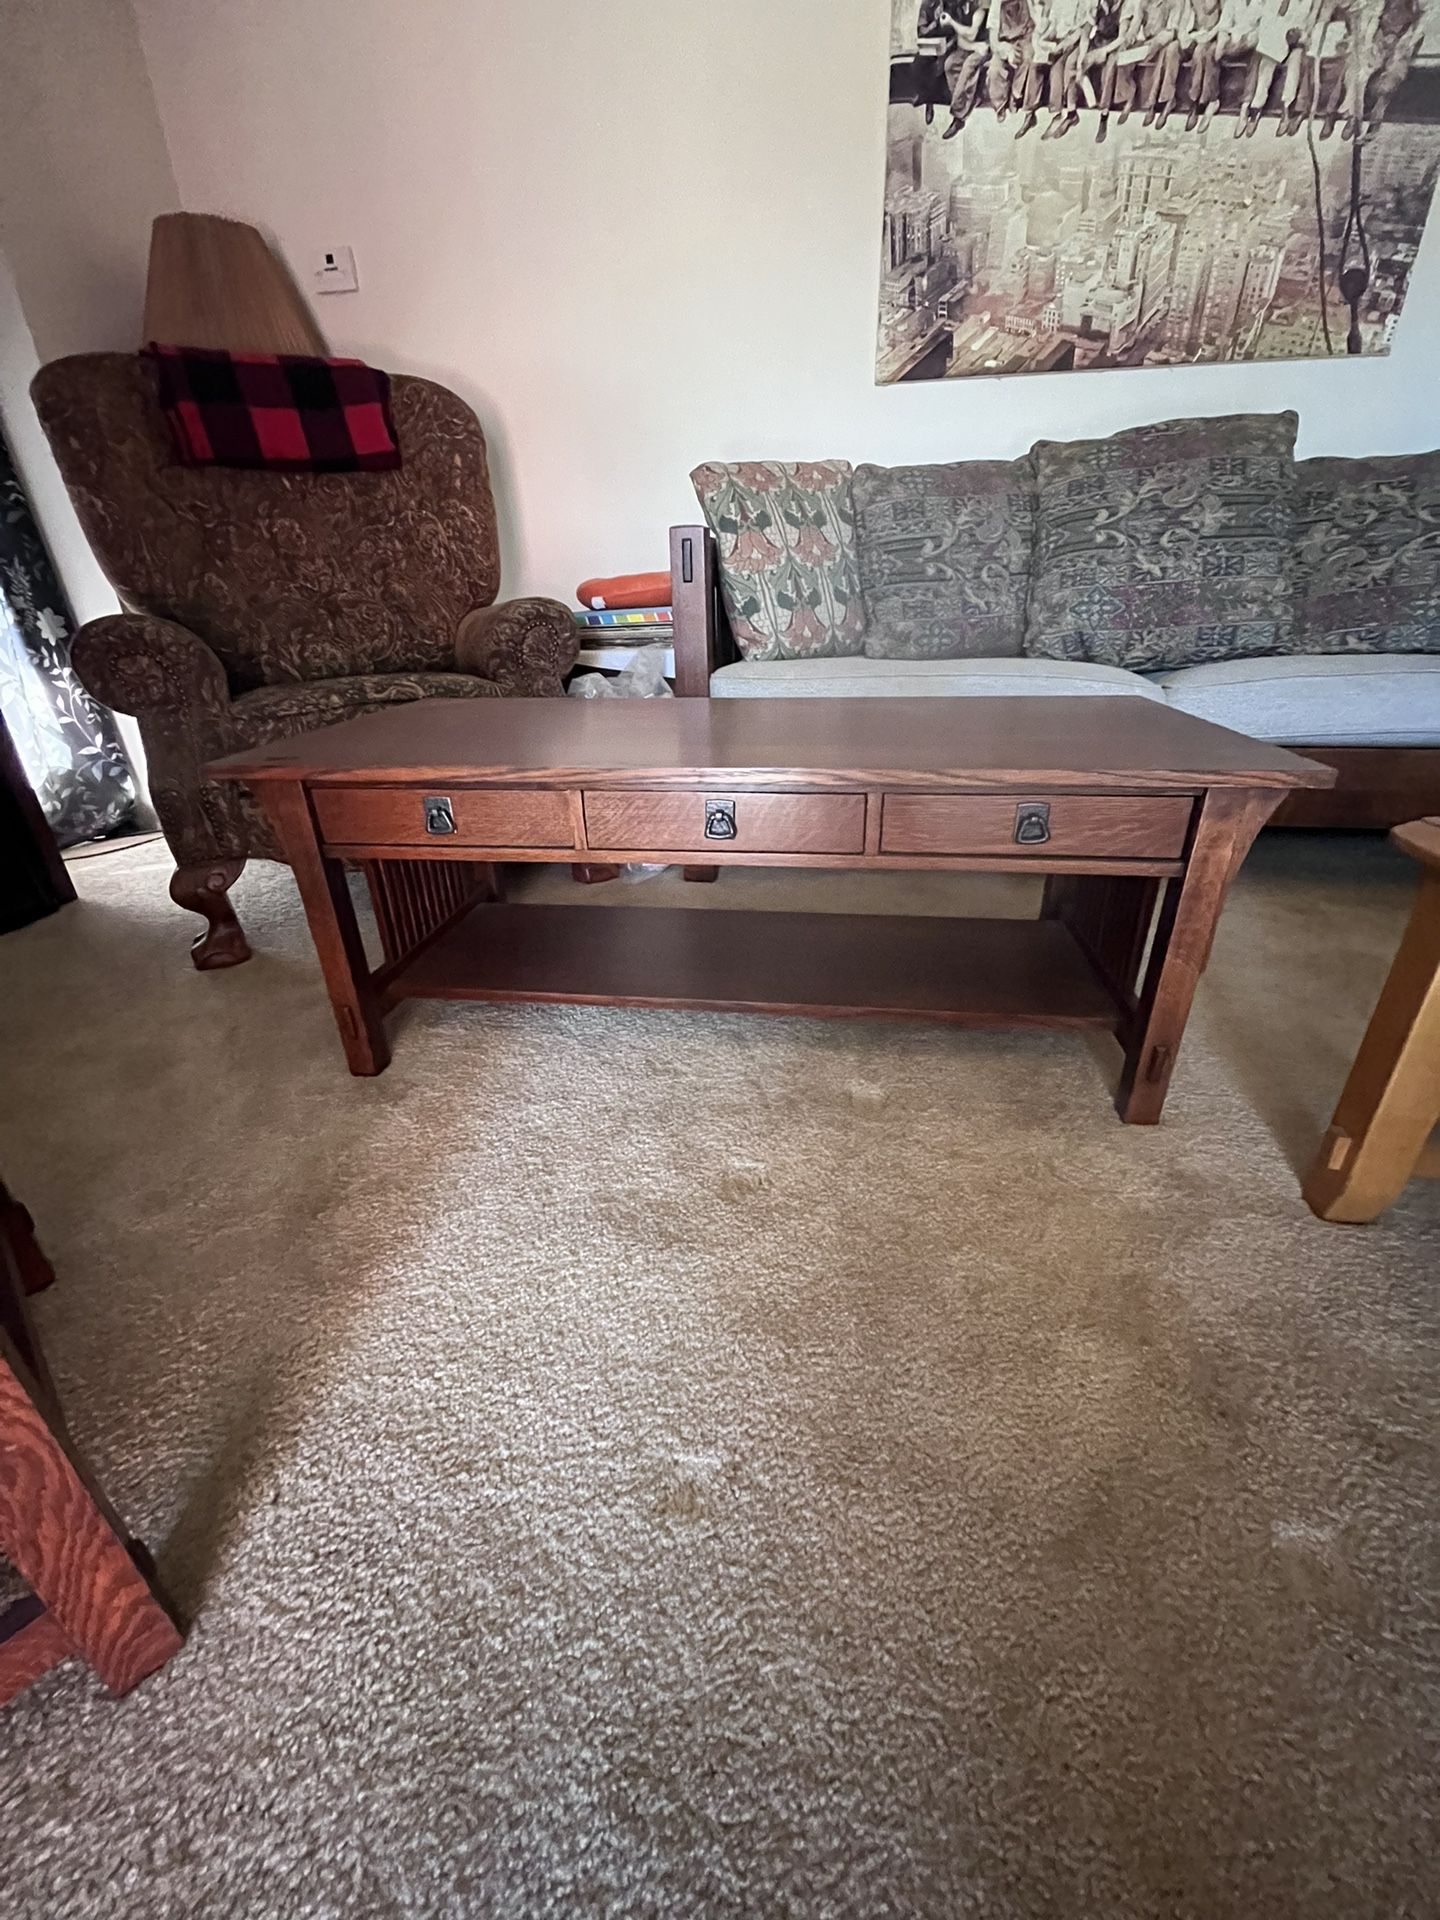 Stickley Genuine Coffee Table, Manufactured In 2021. Barely Used. Solid Oak, This Cost $1500 When Brand New. You Will Not Be Disappointed!